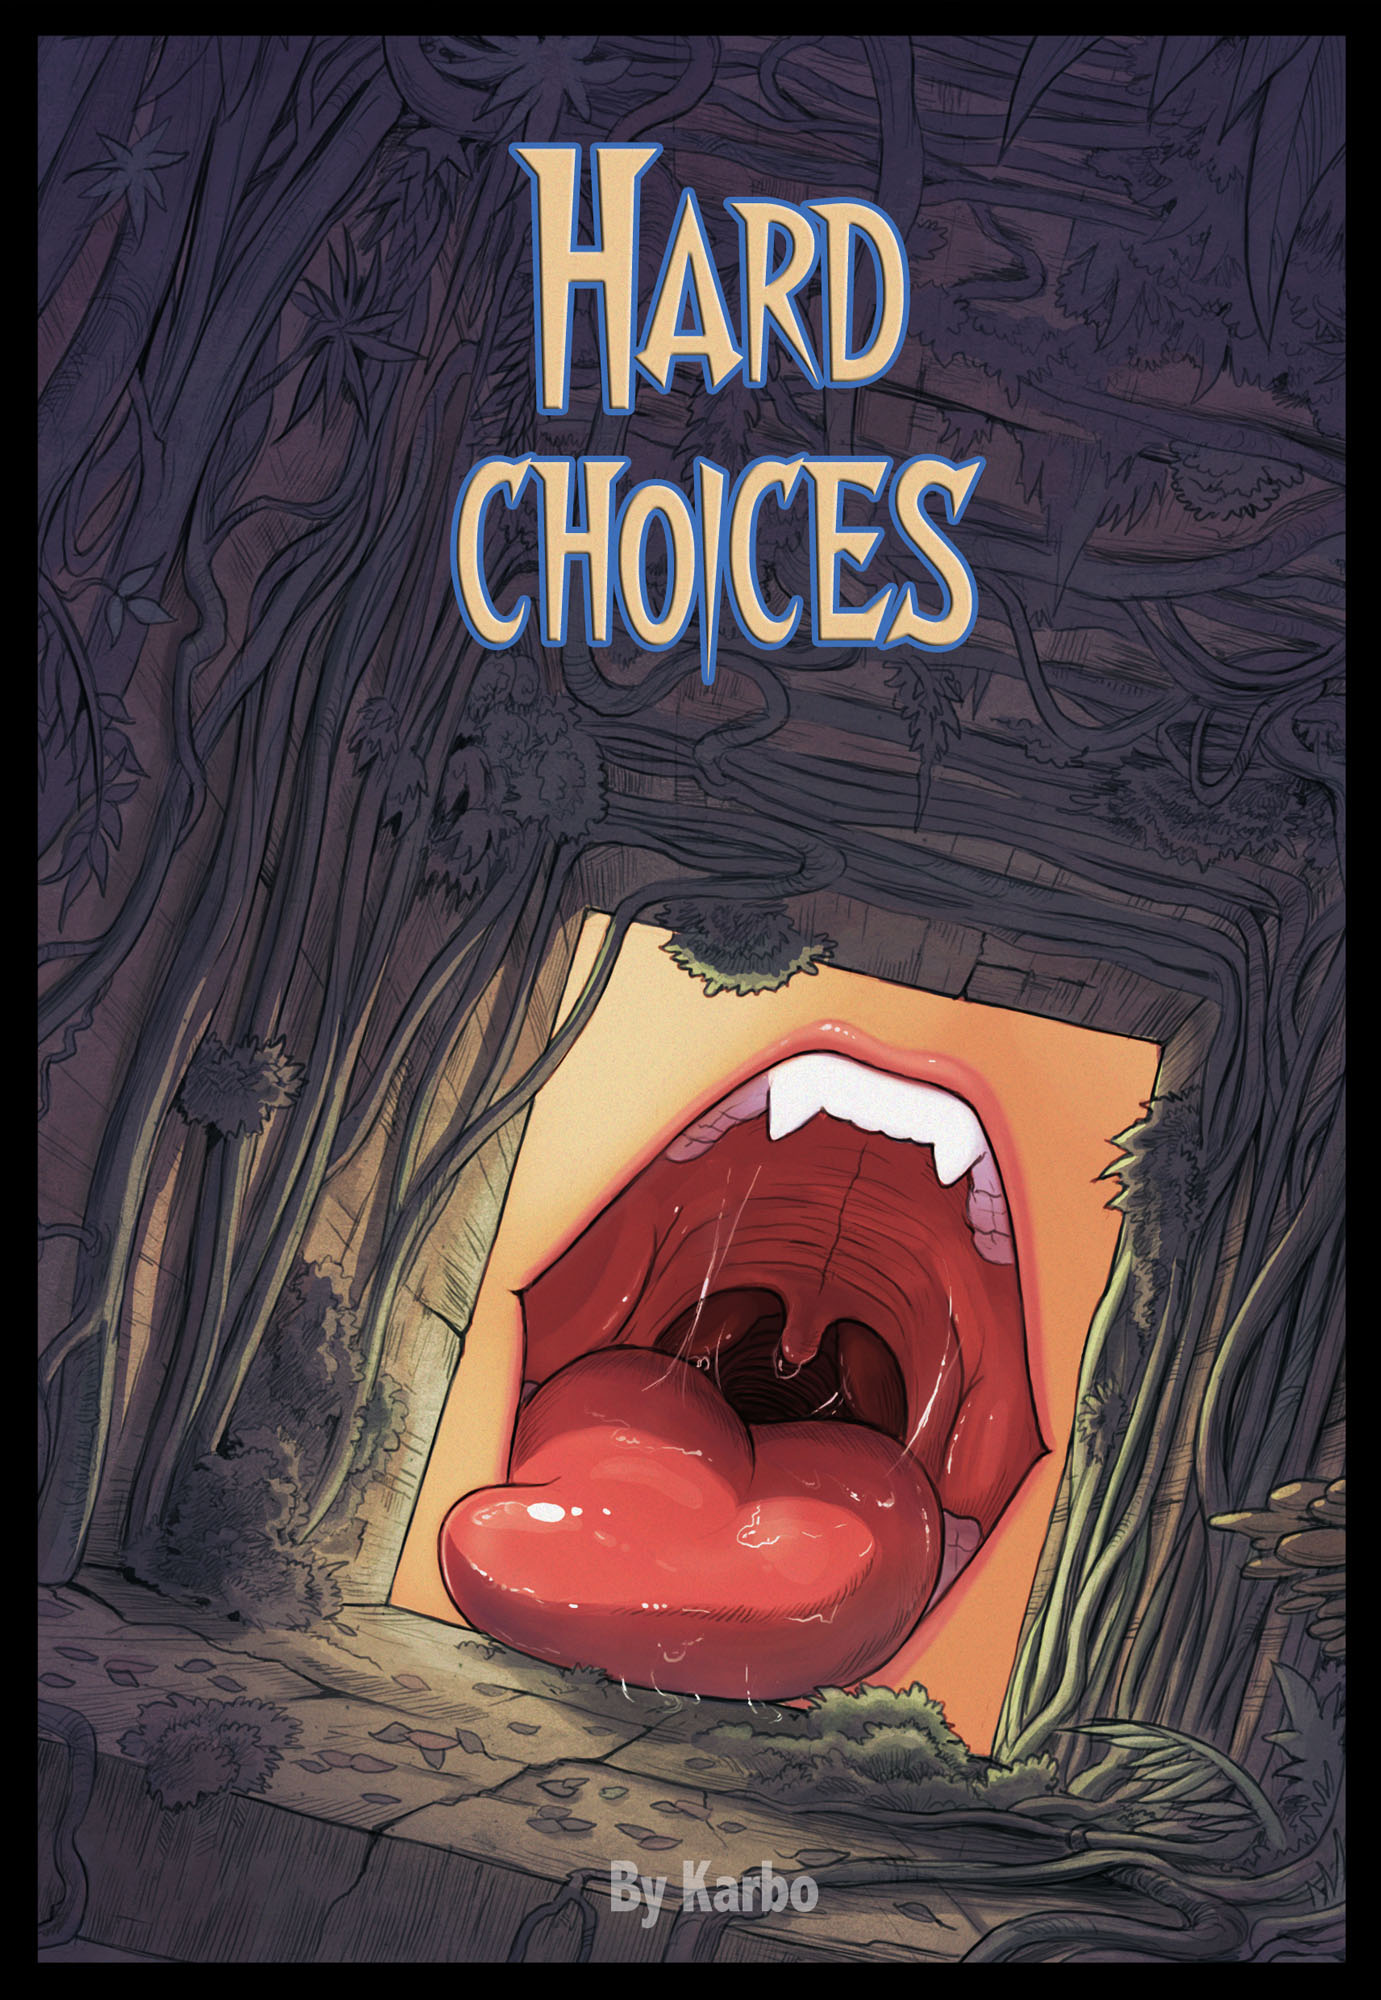 Vore adult comic by Karbo - Hard Choices